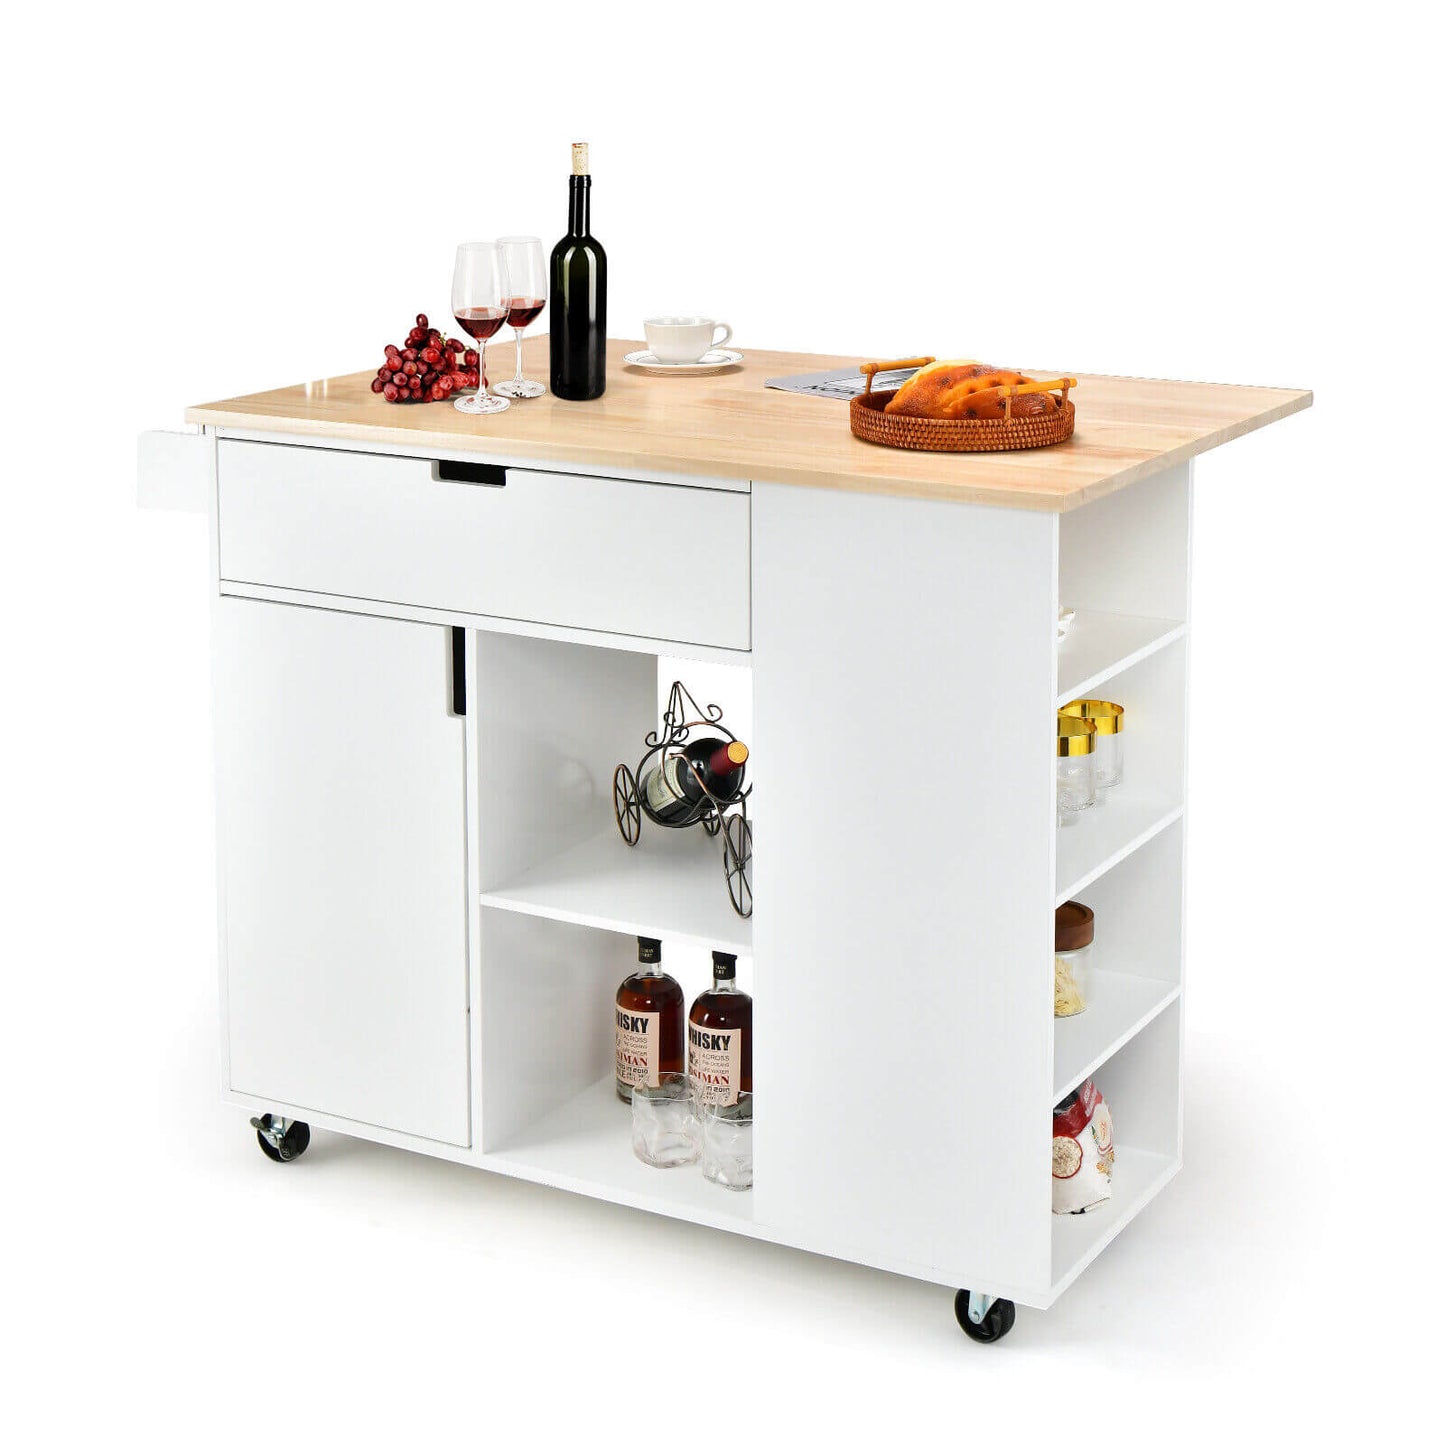 Drop-Leaf Kitchen Island with Rubber Wood Top, White